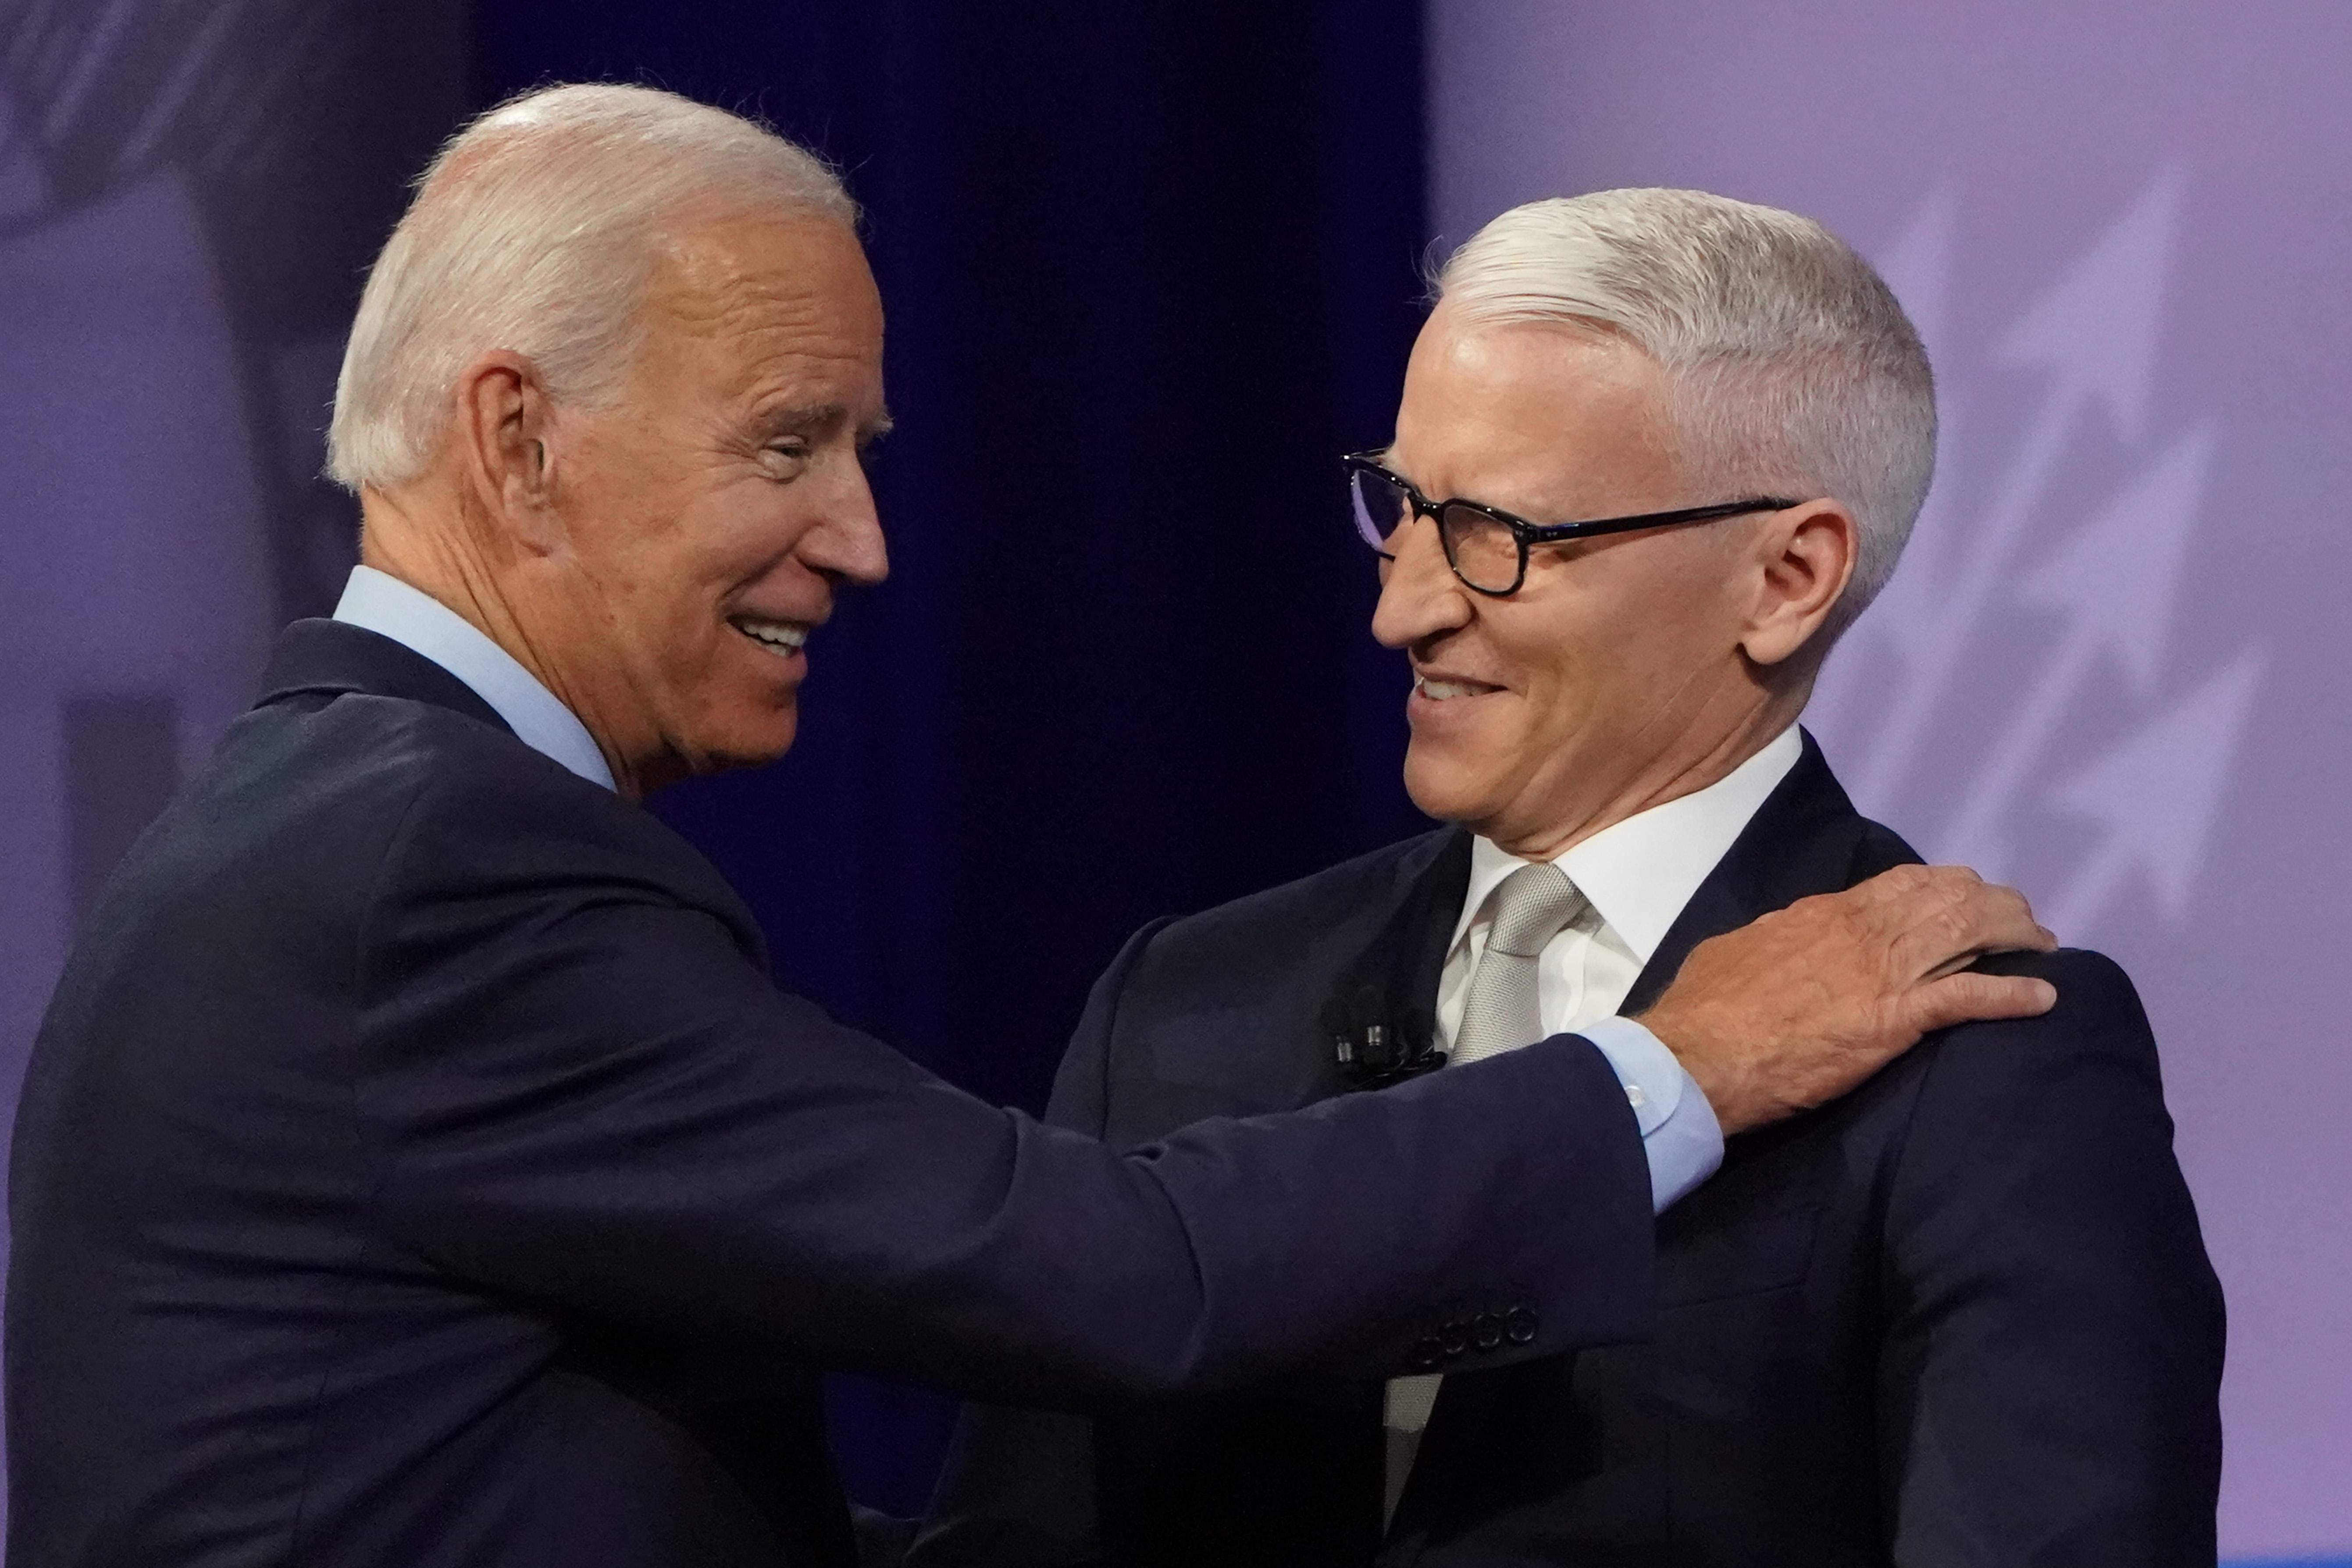 Joe Biden places his right hand on Anderson Cooper's right shoulder as both men smile.